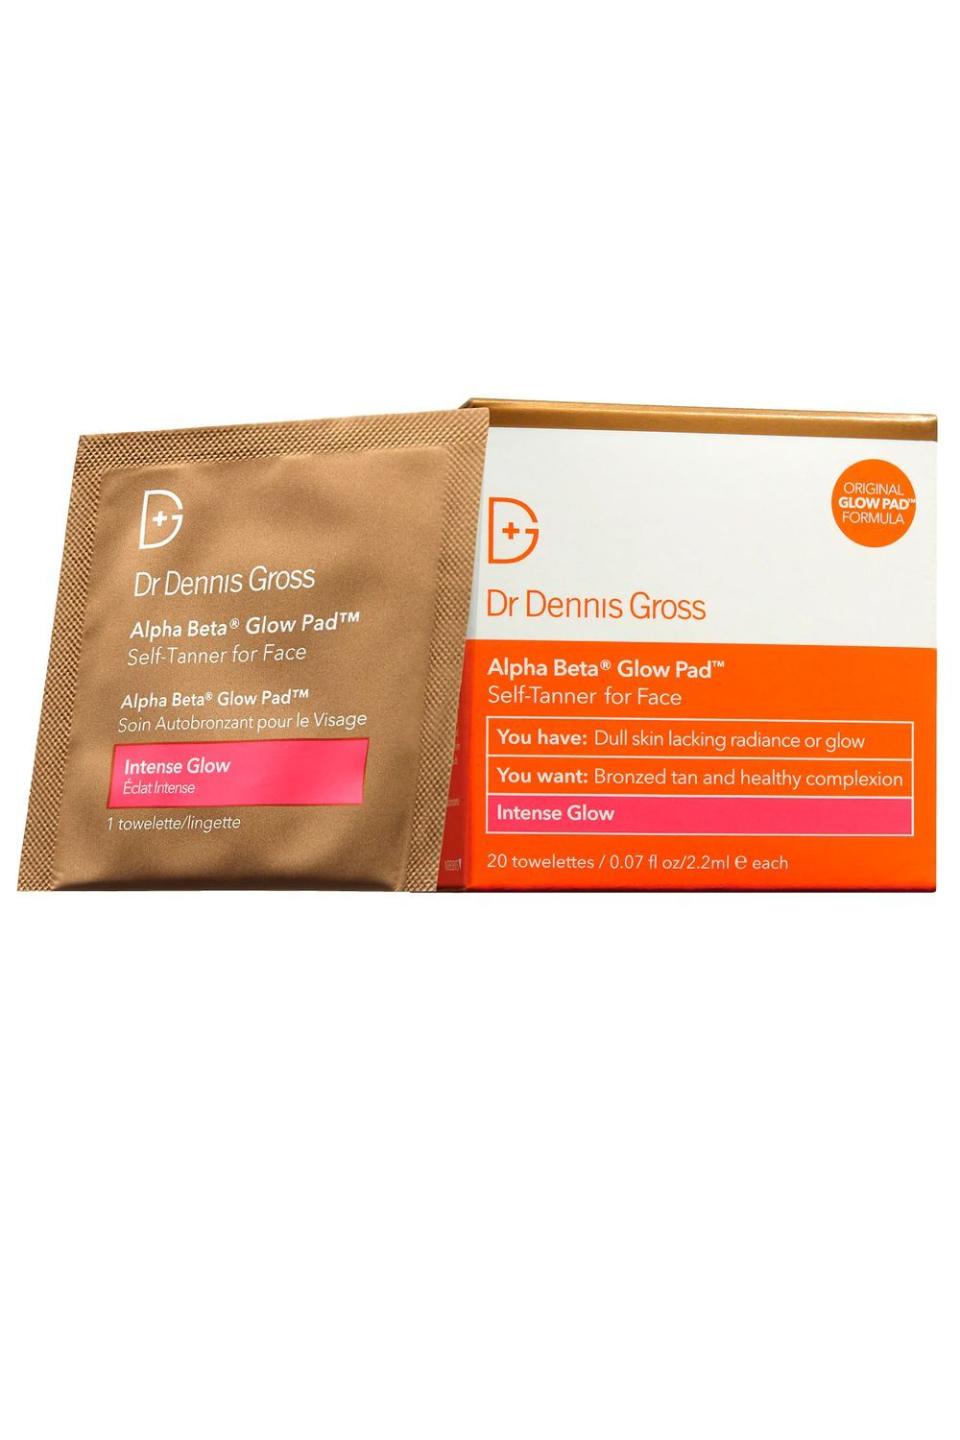 11) Dr. Dennis Gross Alpha Beta Glow Pad Self-Tanner for Face